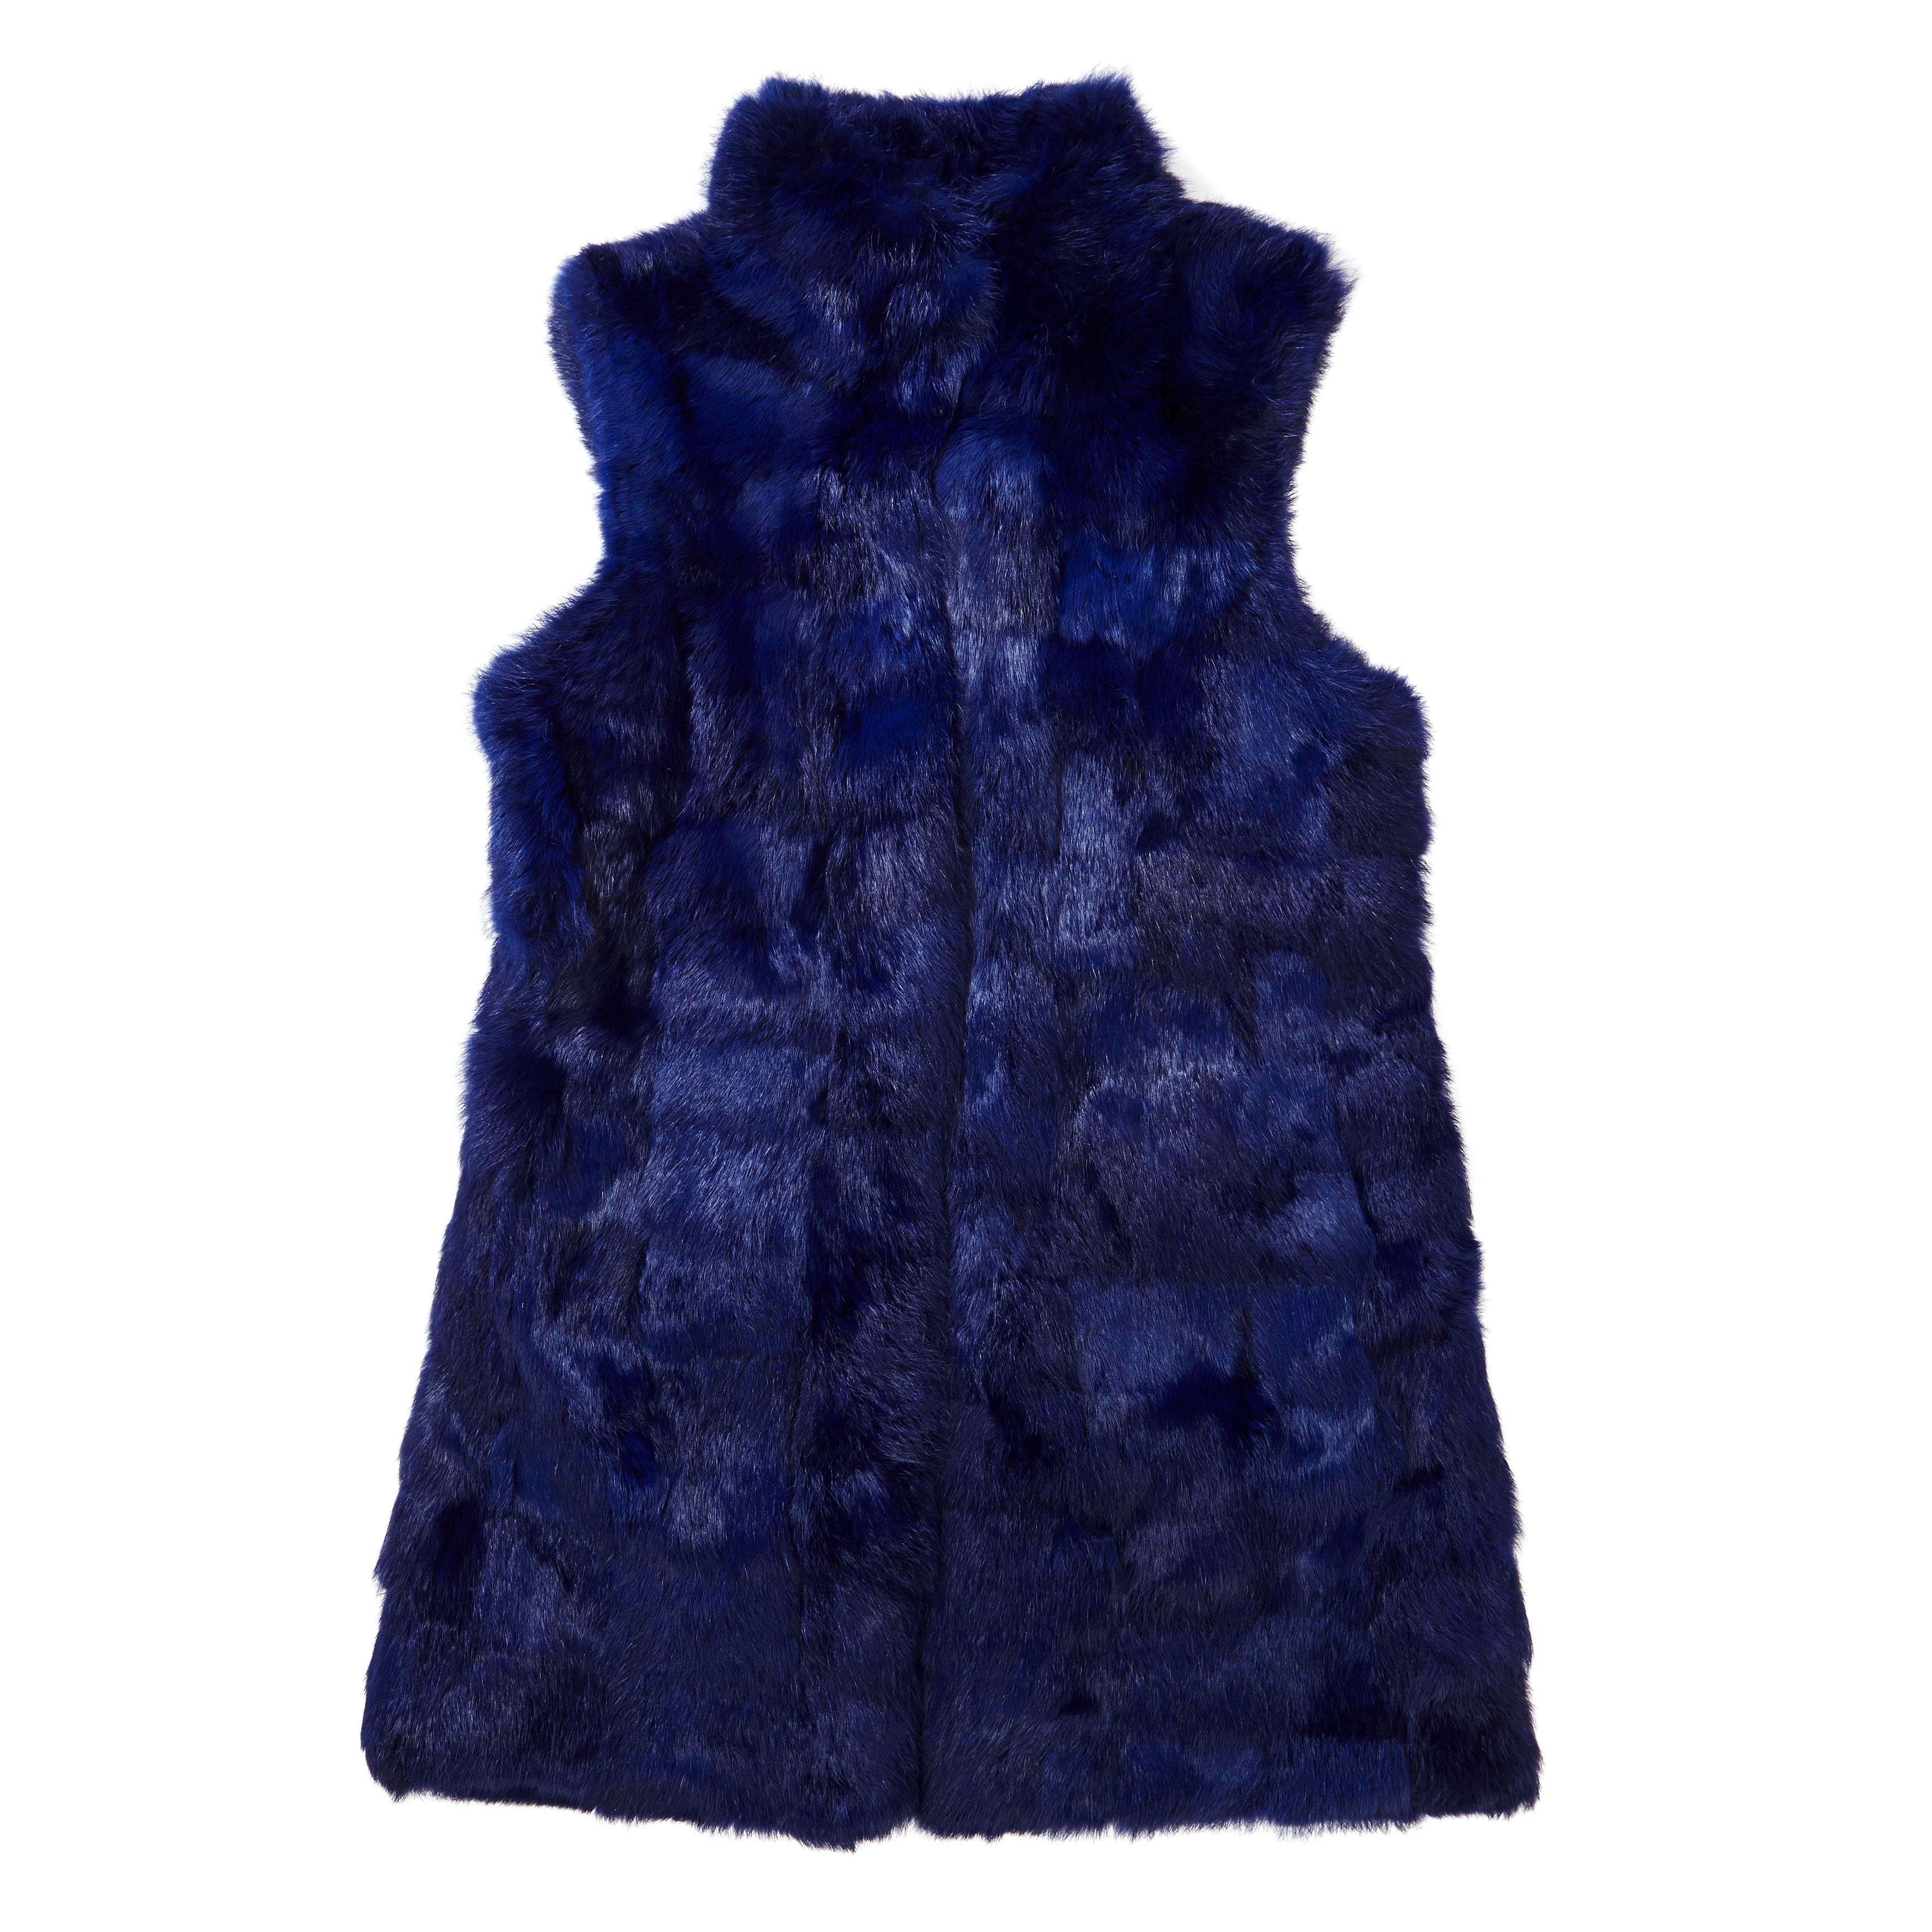 PRODUCT DETAILS
The Nehru gilet is Verheyen London’s casual design. The tailored statement gilet is perfect with a pair or jeans, and or over a jumper in the Autumn.


Colour: Navy Sapphire 
Dyed Rabbit
Size: uk 8-10

Made in Greece
